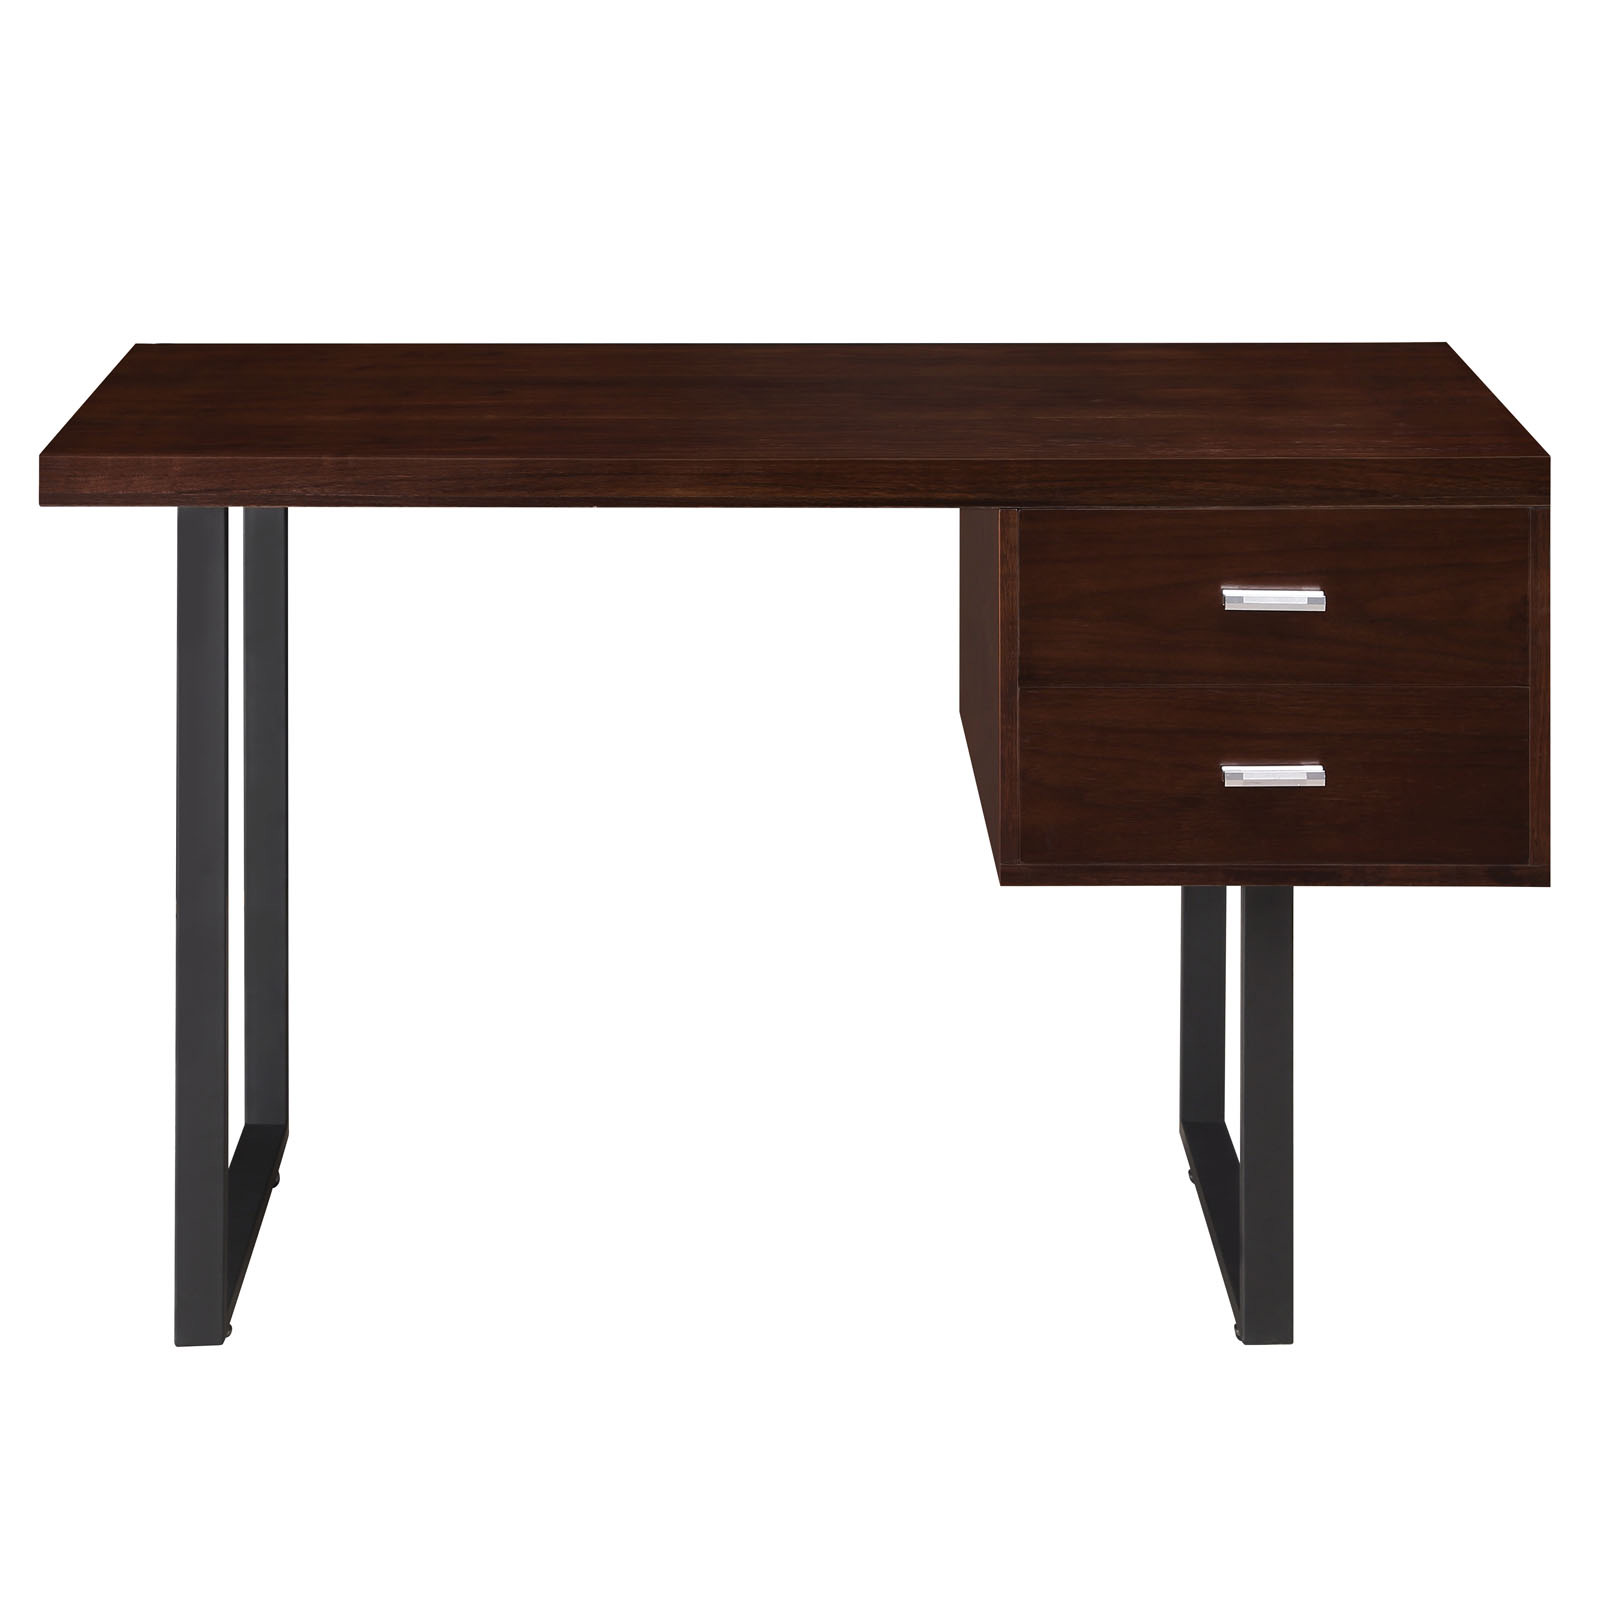 Space saving desk from Modway - Front View - Shown in Walnut (Brown)